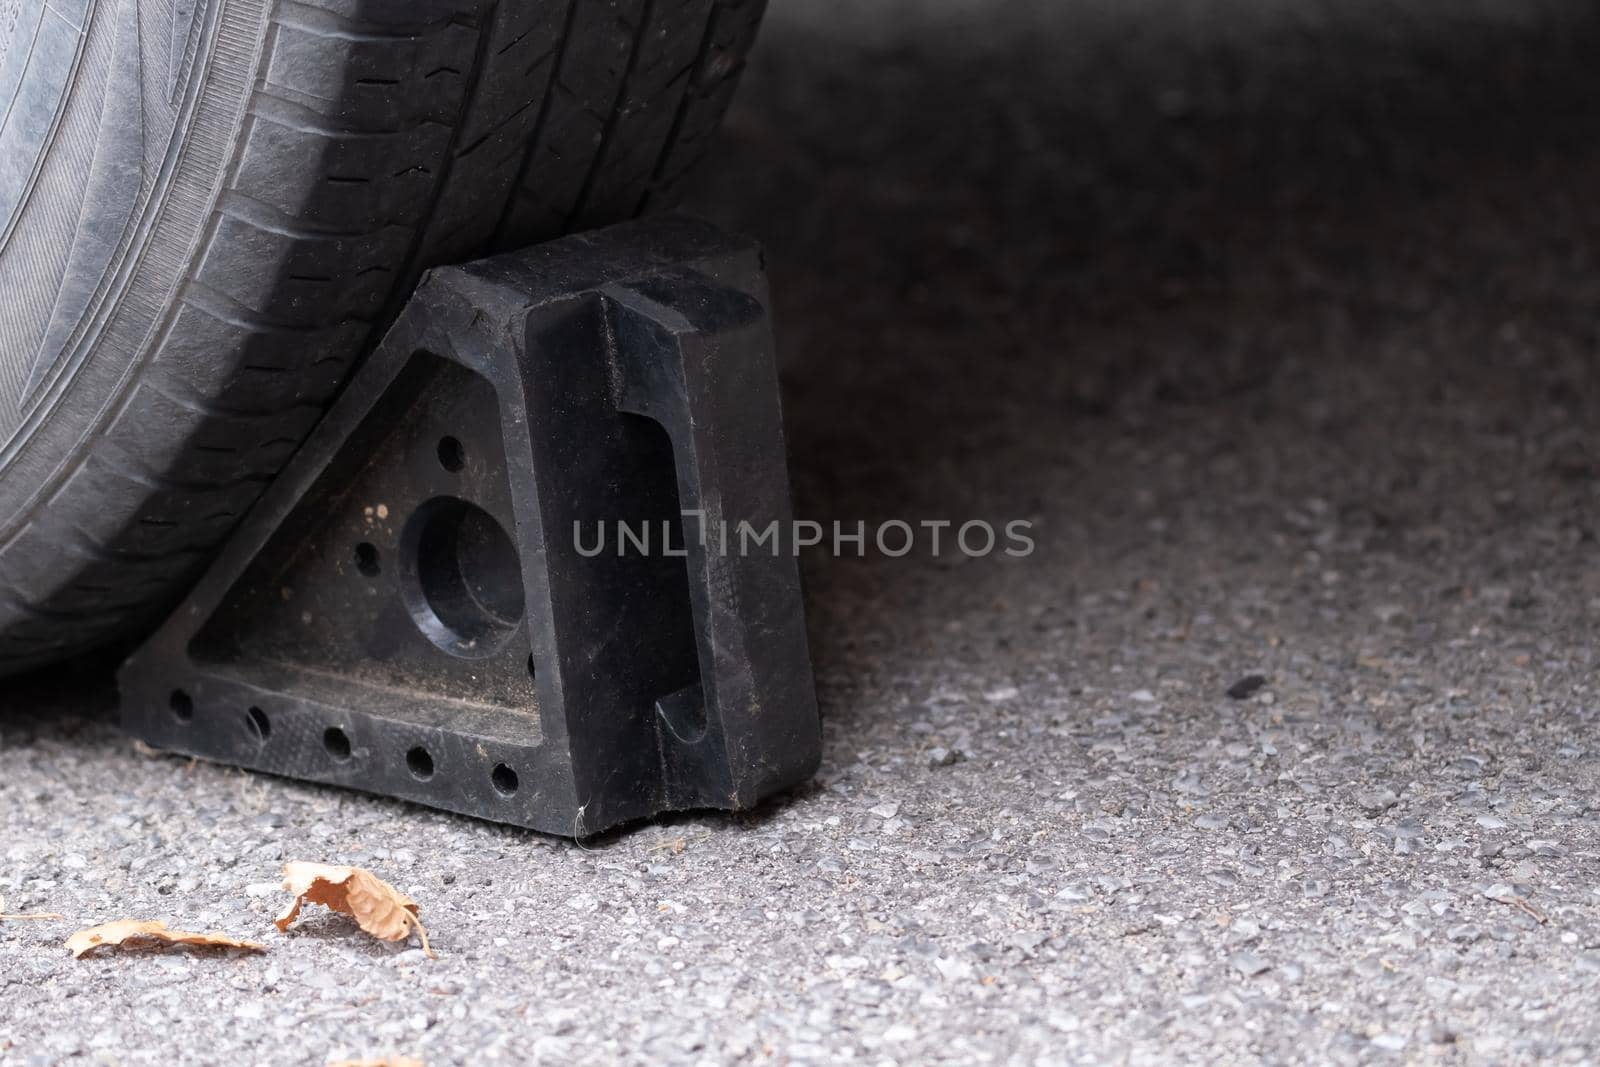 A black rubber wheel chock on the ground is placed behind a car tire to keep the vehicle in place. It is on a paved asphalt driveway with autumn leaves beside it.